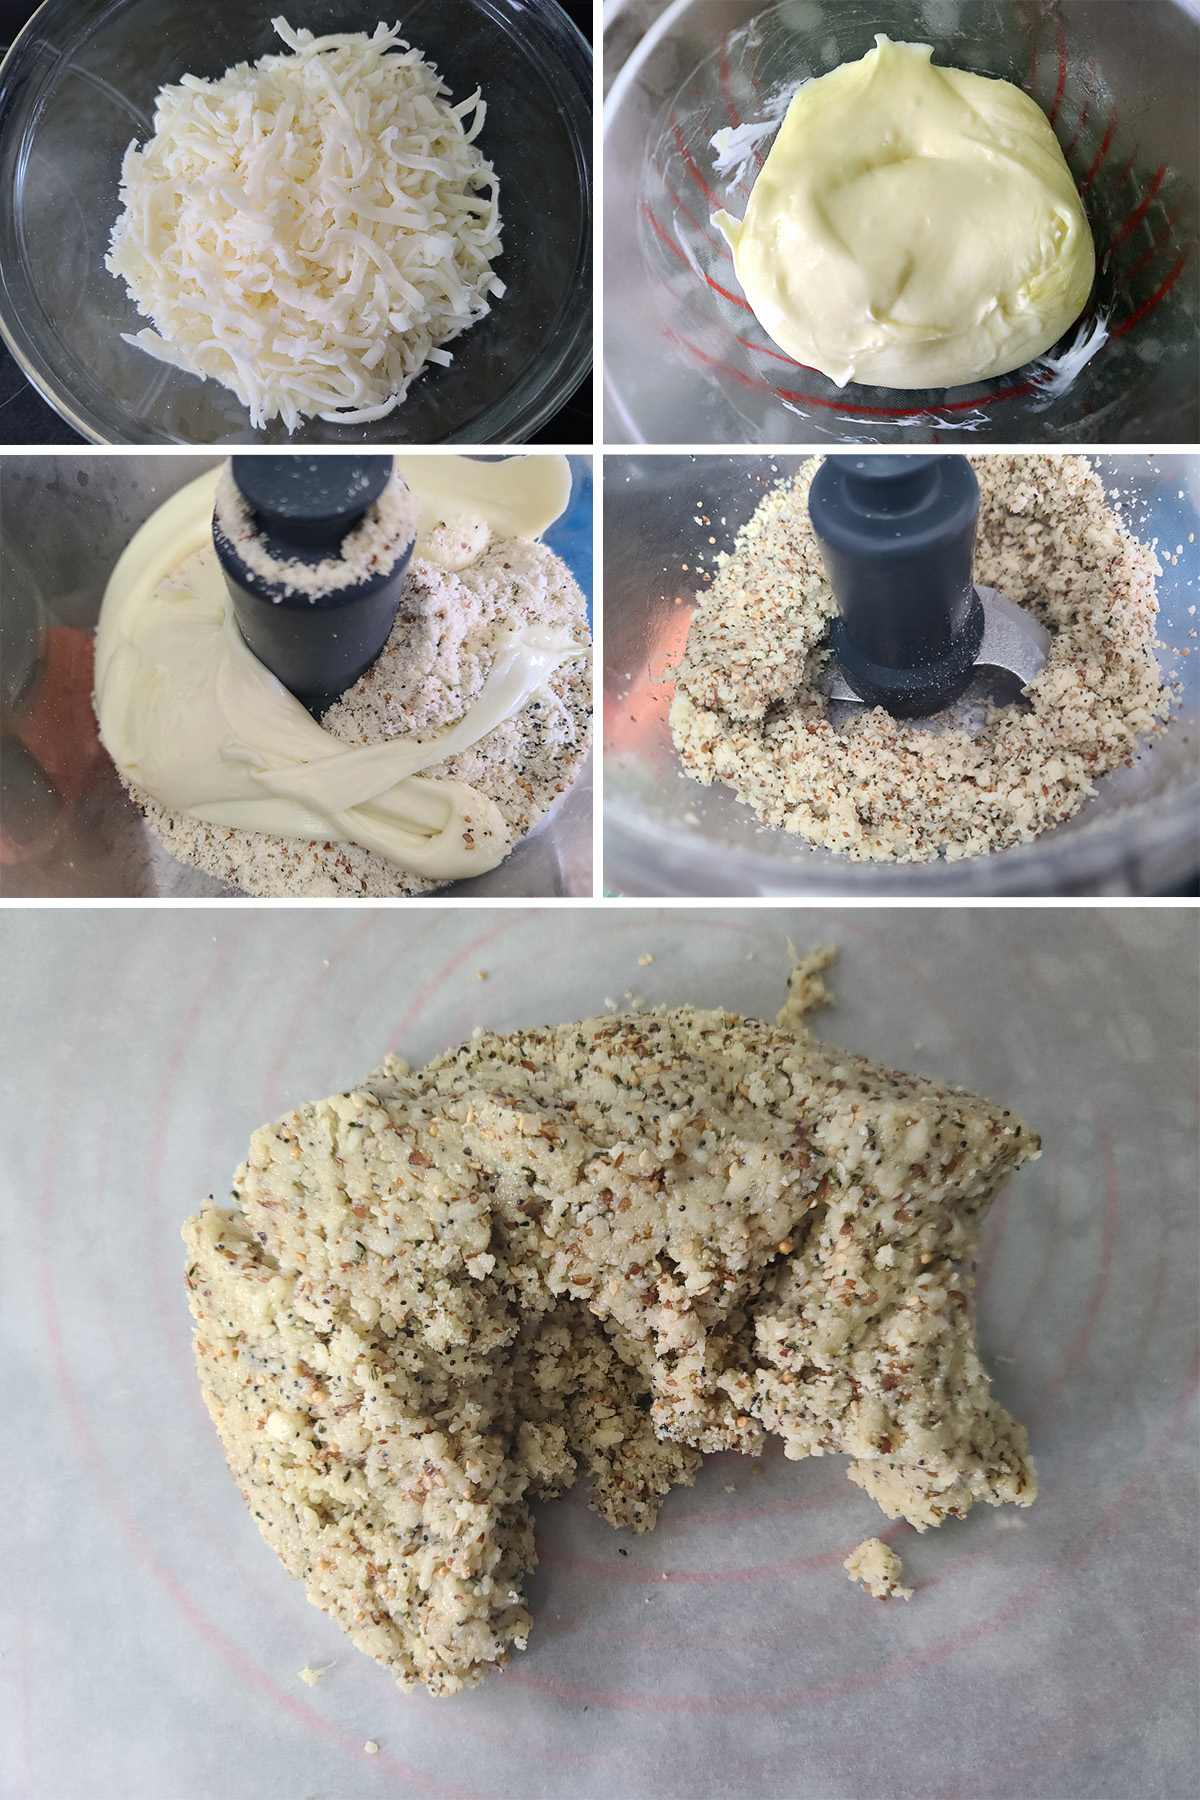 A 5 part image showing the cheese being added to the bowl of dry ingredients and blitzed into a dough.